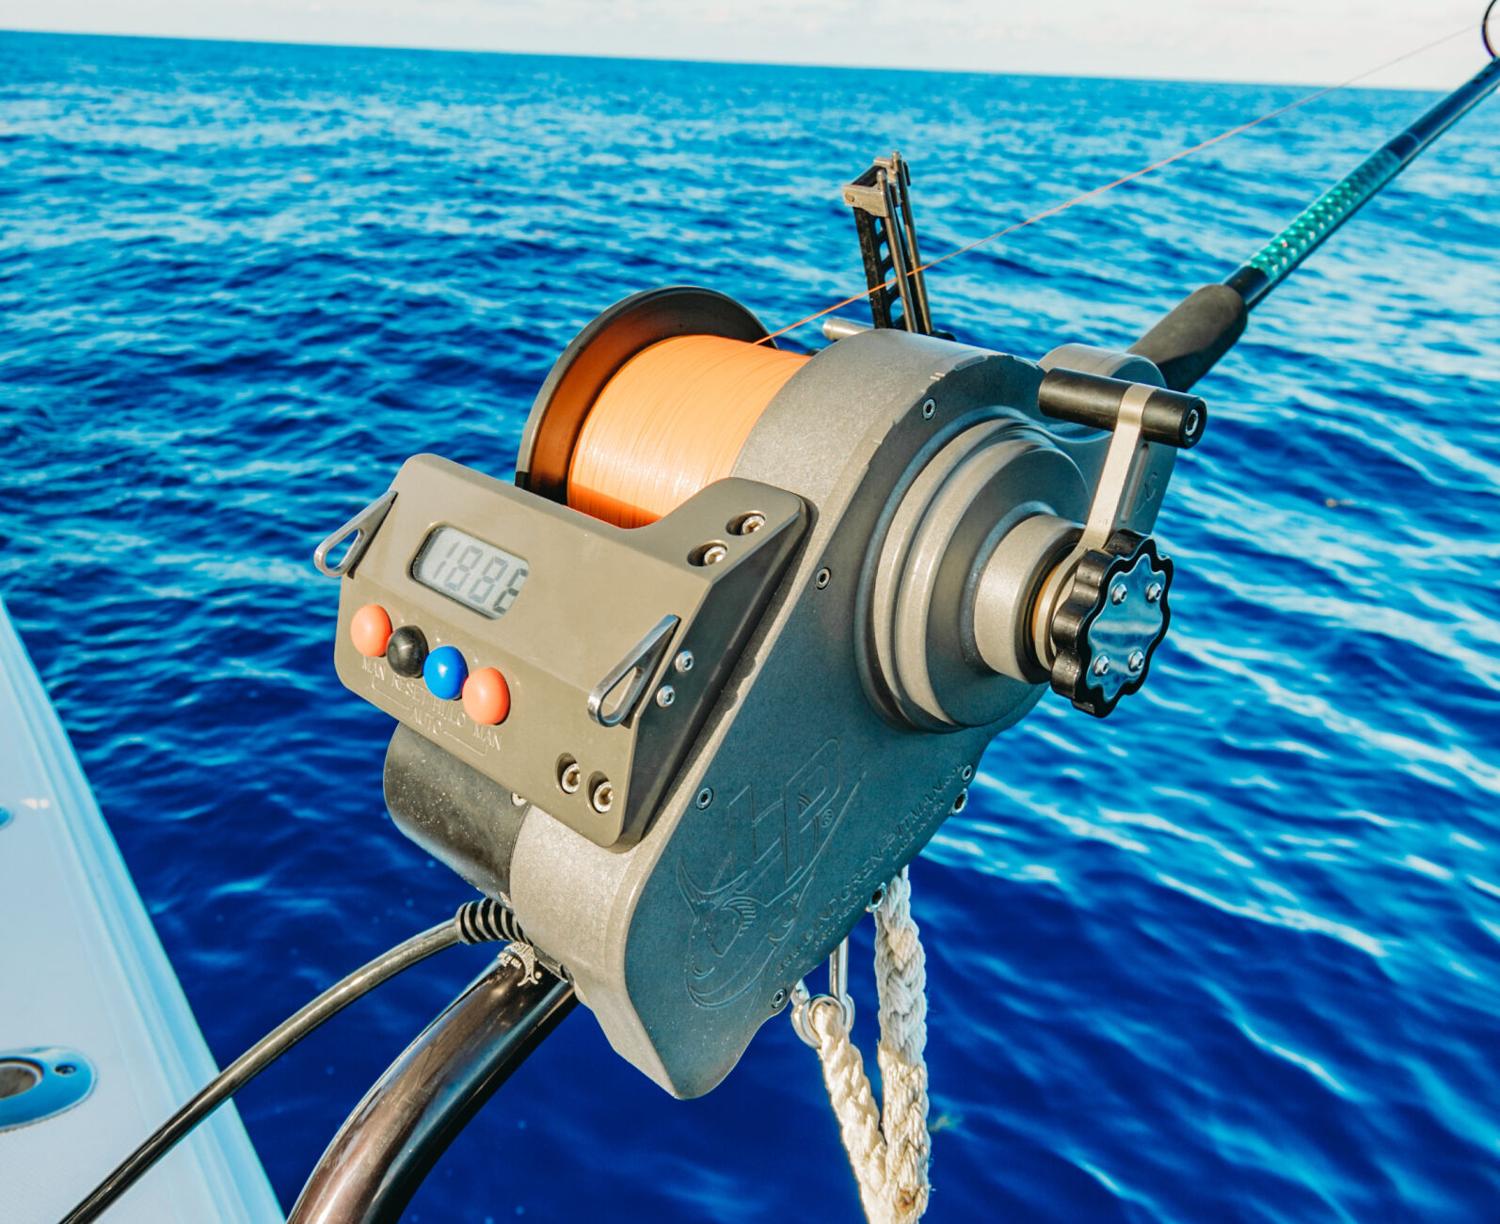 Anniversary Gifts For her - Daiwa Seaborg Electric Reel Power Cord